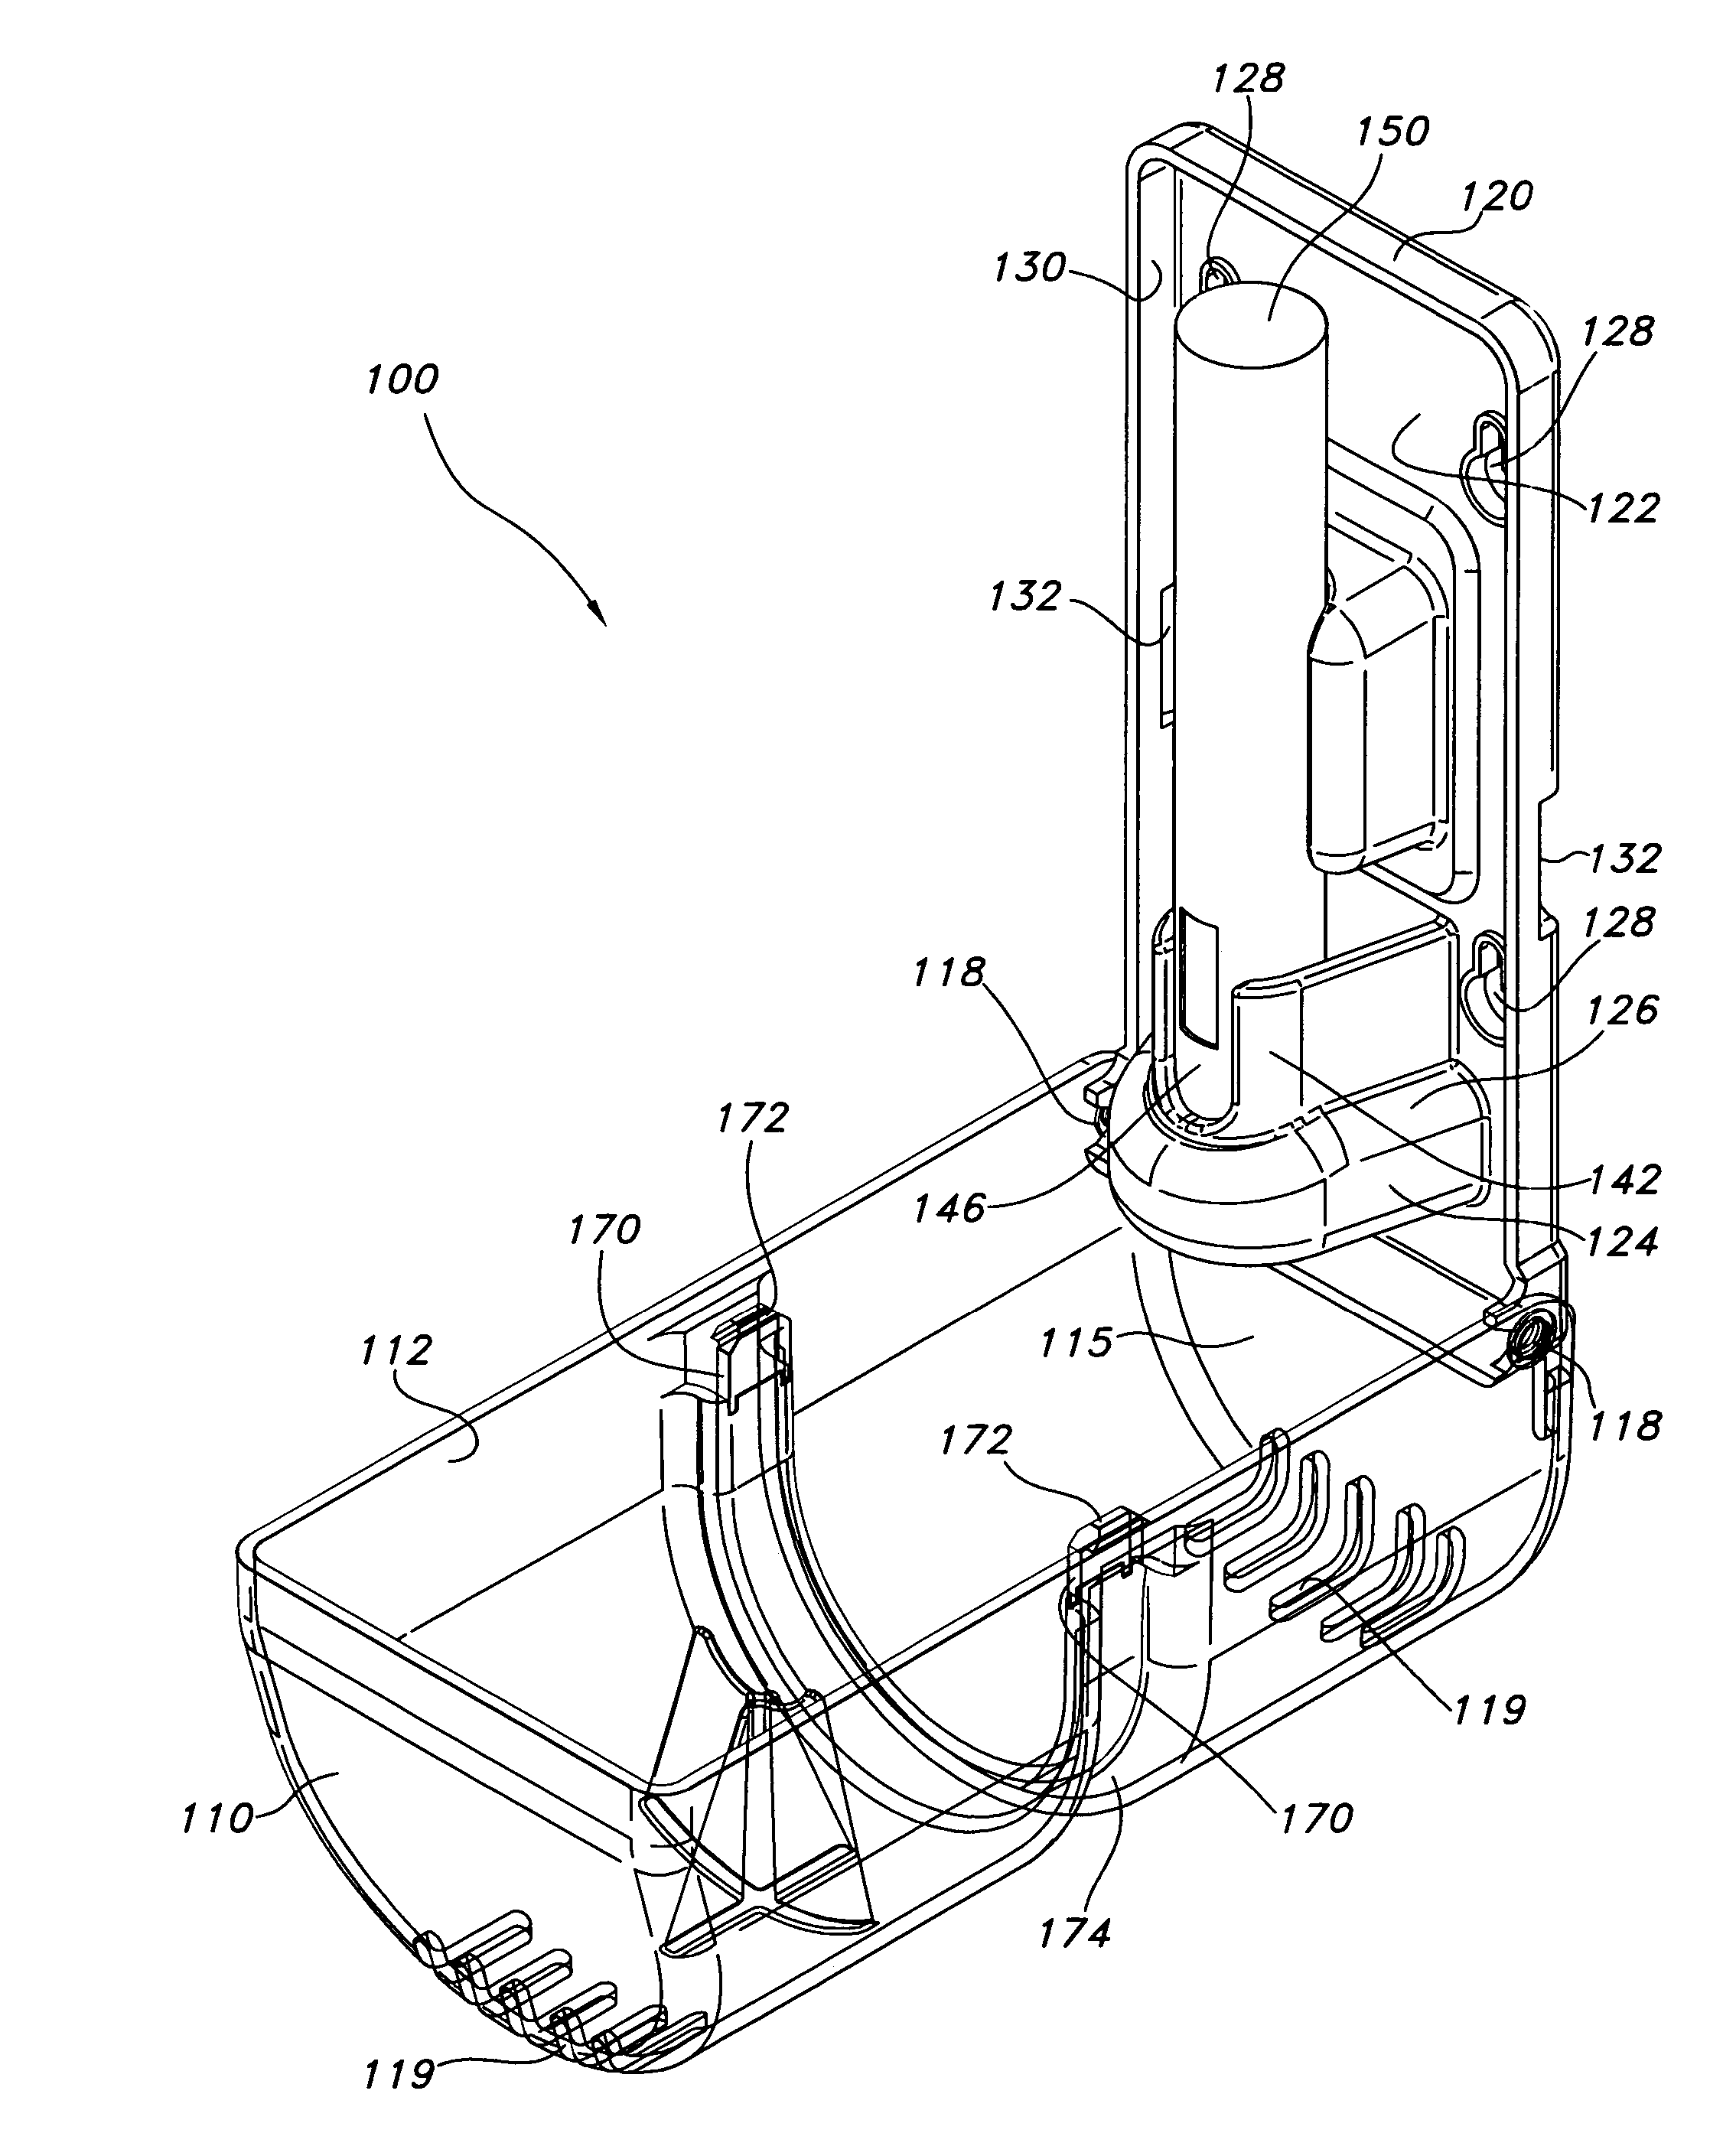 Auto-injector storage and dispensing system